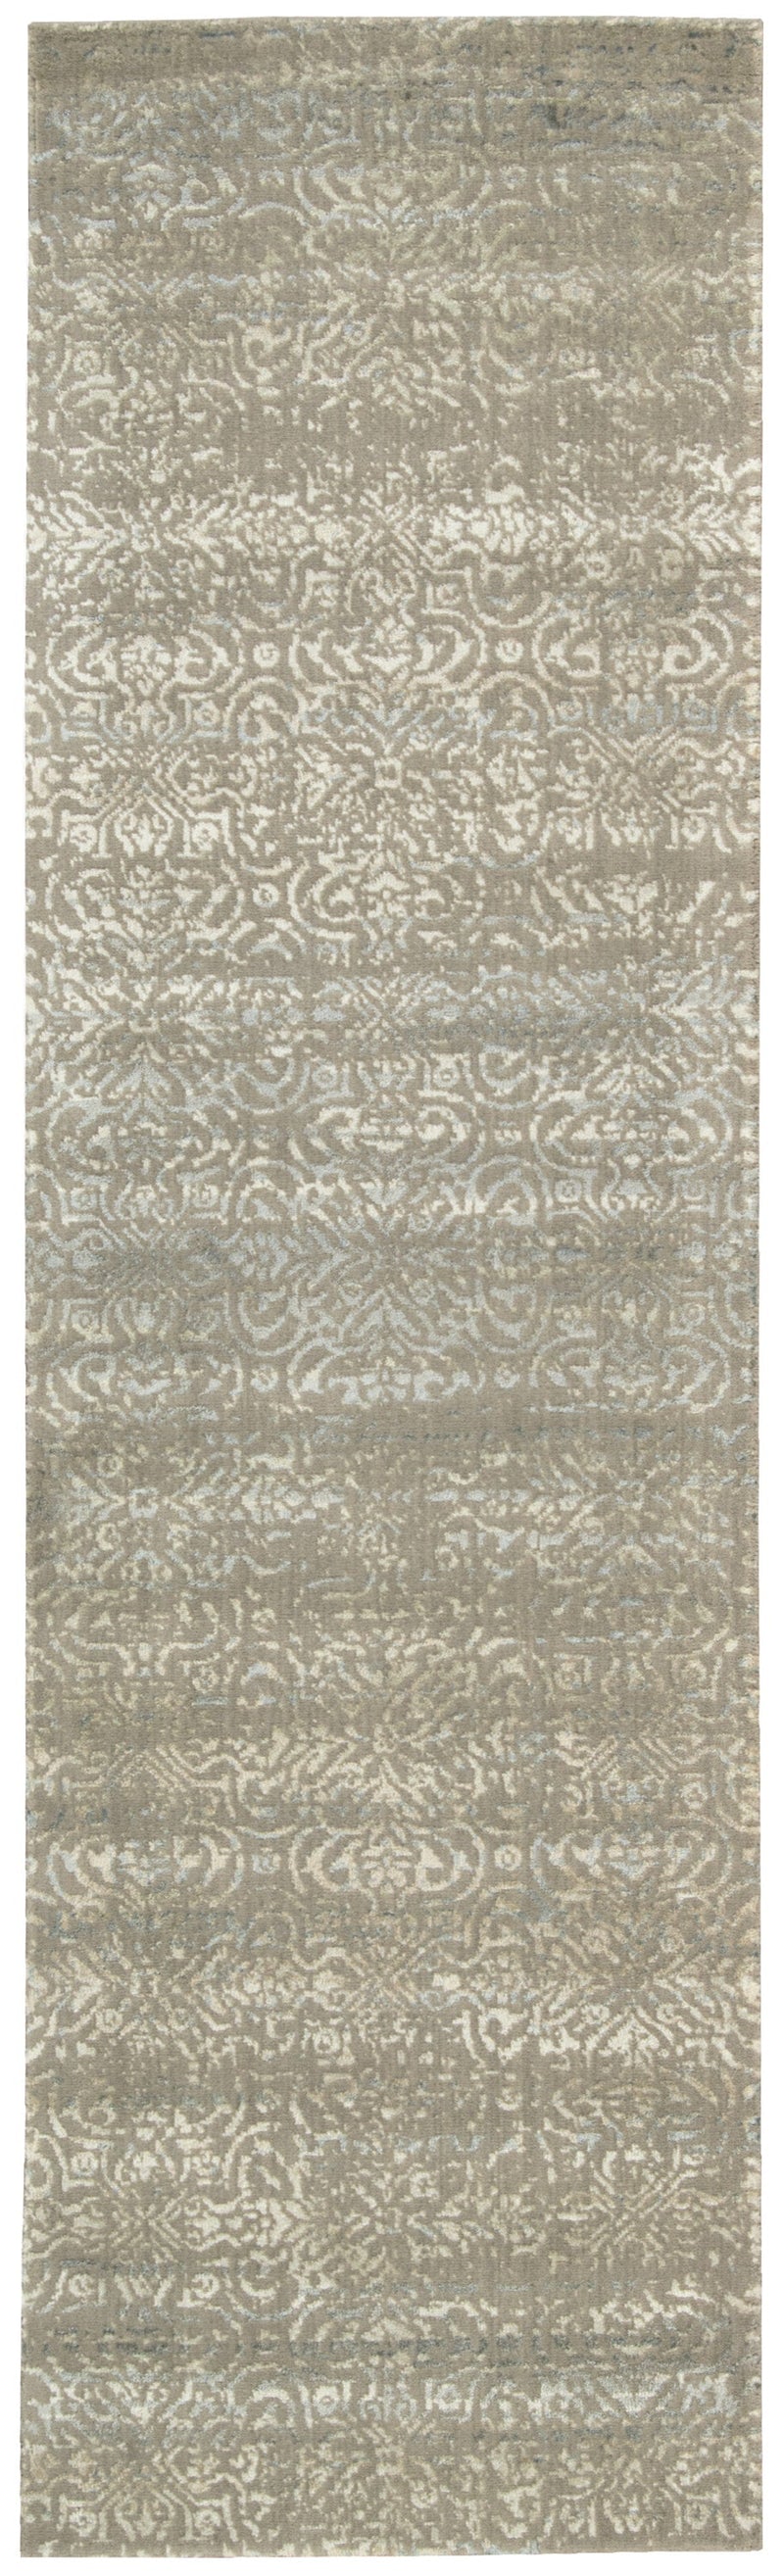 media image for maya hand loomed abalone rug by calvin klein home nsn 099446190604 2 260